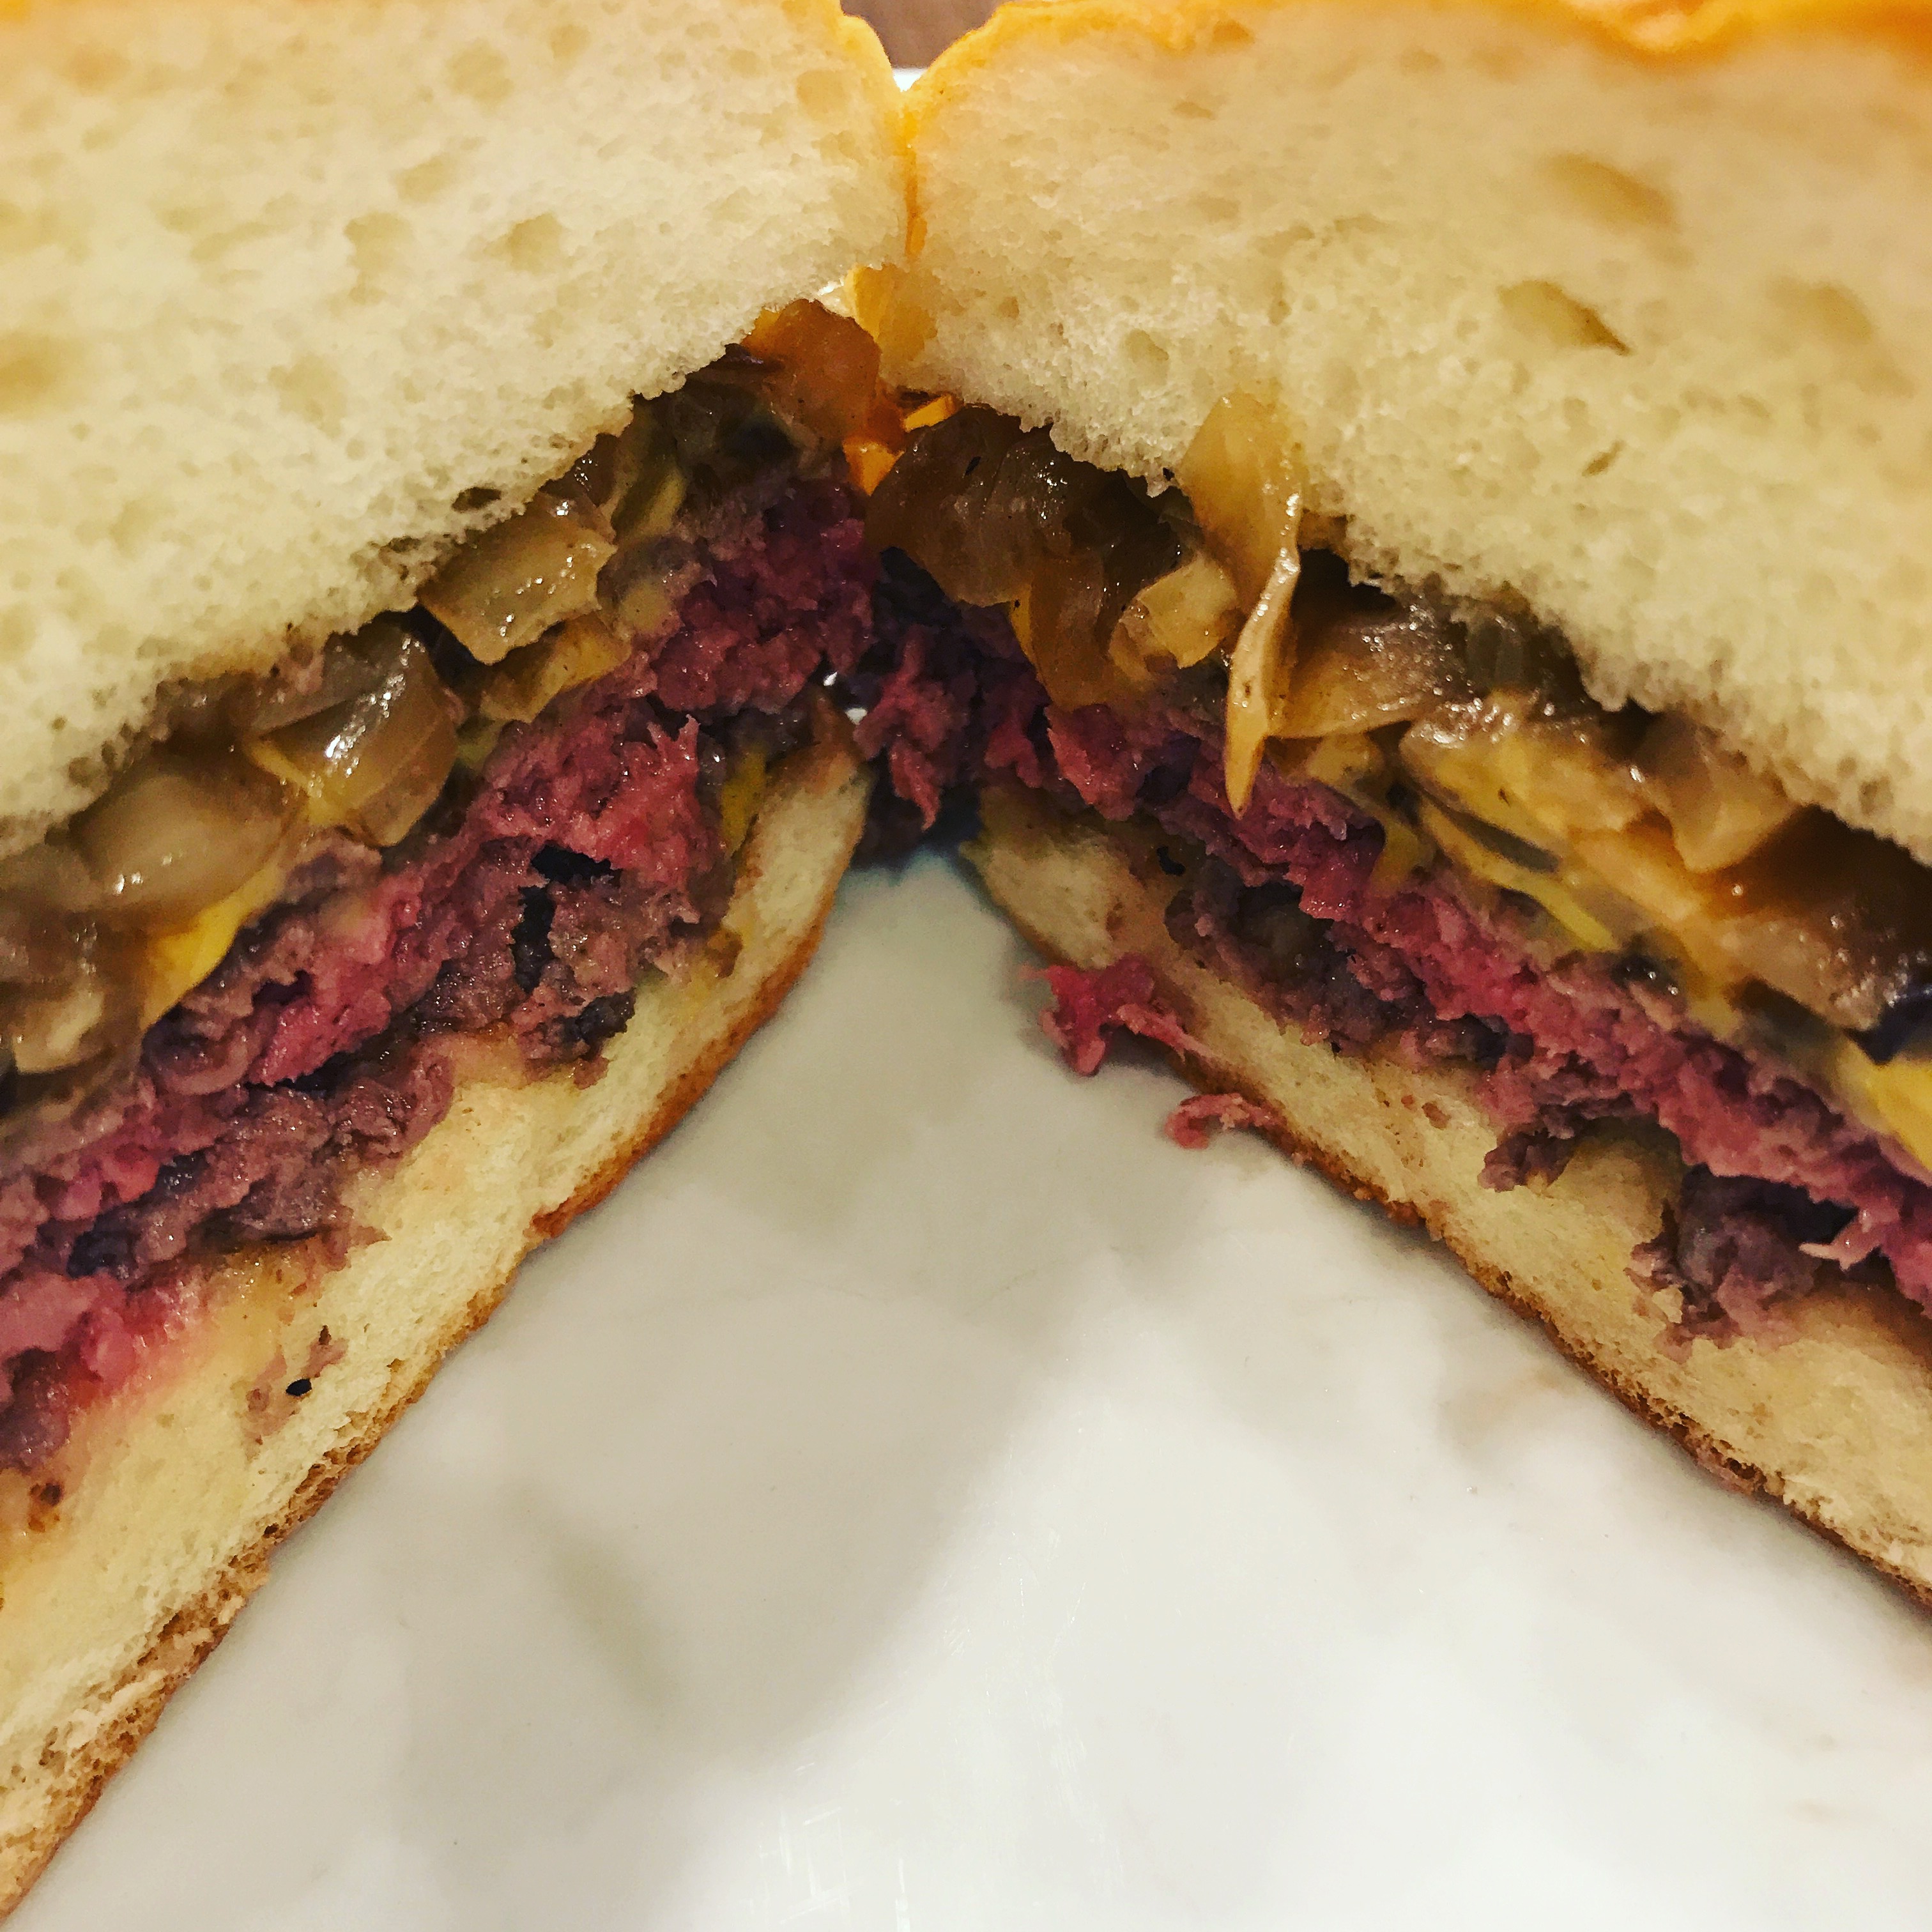 Montclair Eats: A burger is right for summer